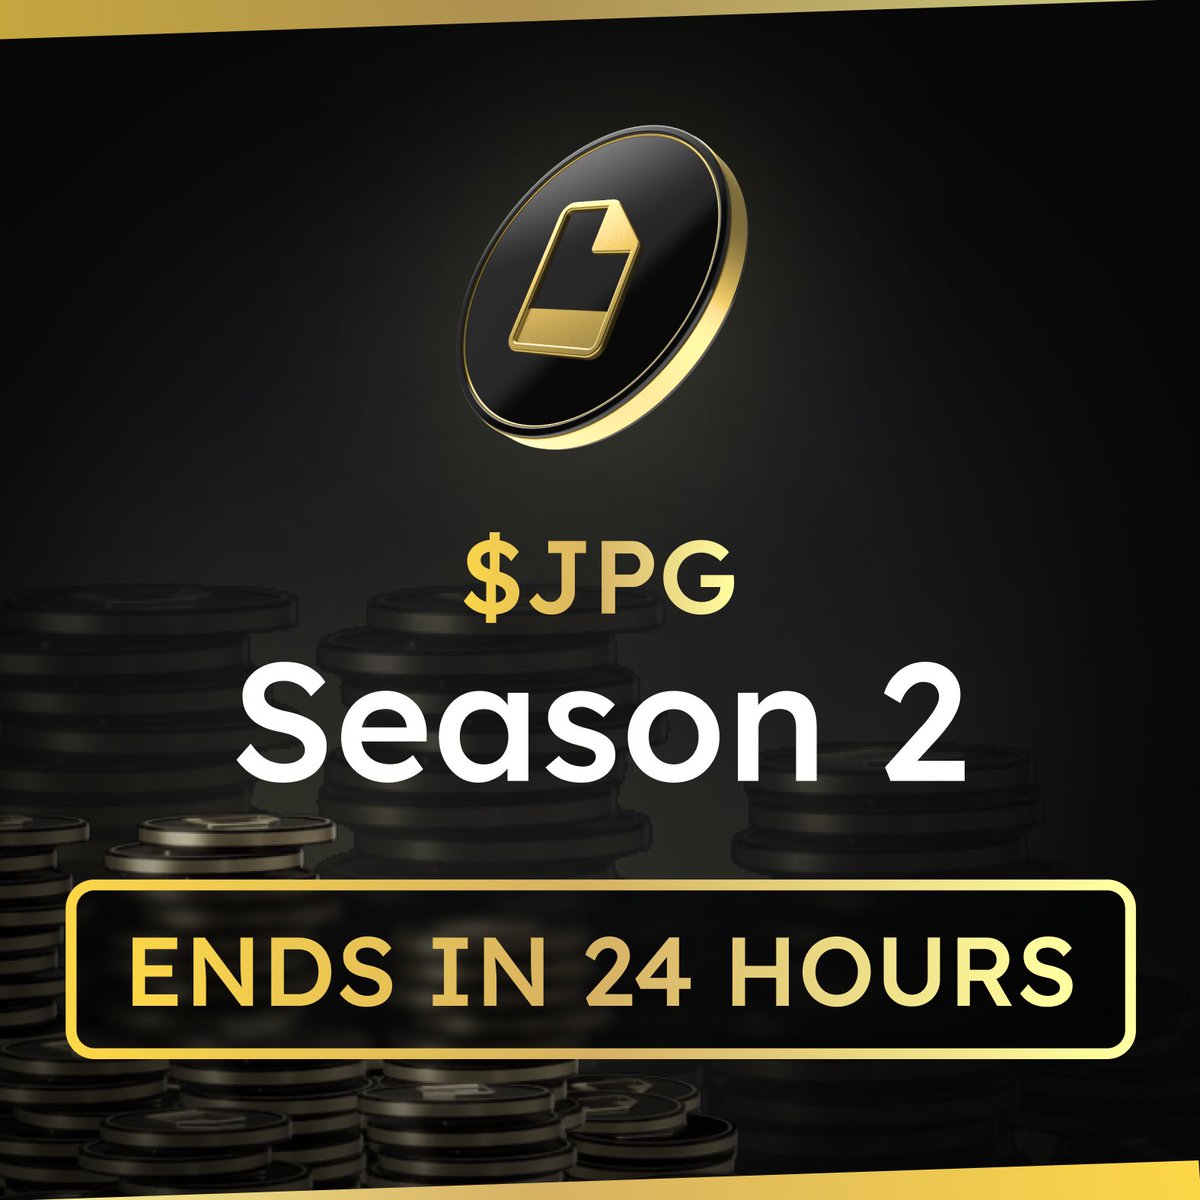 Under 86,400 seconds left of Season 2 🚨 Get your last-minute Sweeps in, earn extra XP and climb the ladder further 🪜 You have the same amount of time to enjoy a 10% global rebate, so make the most of it! ✅